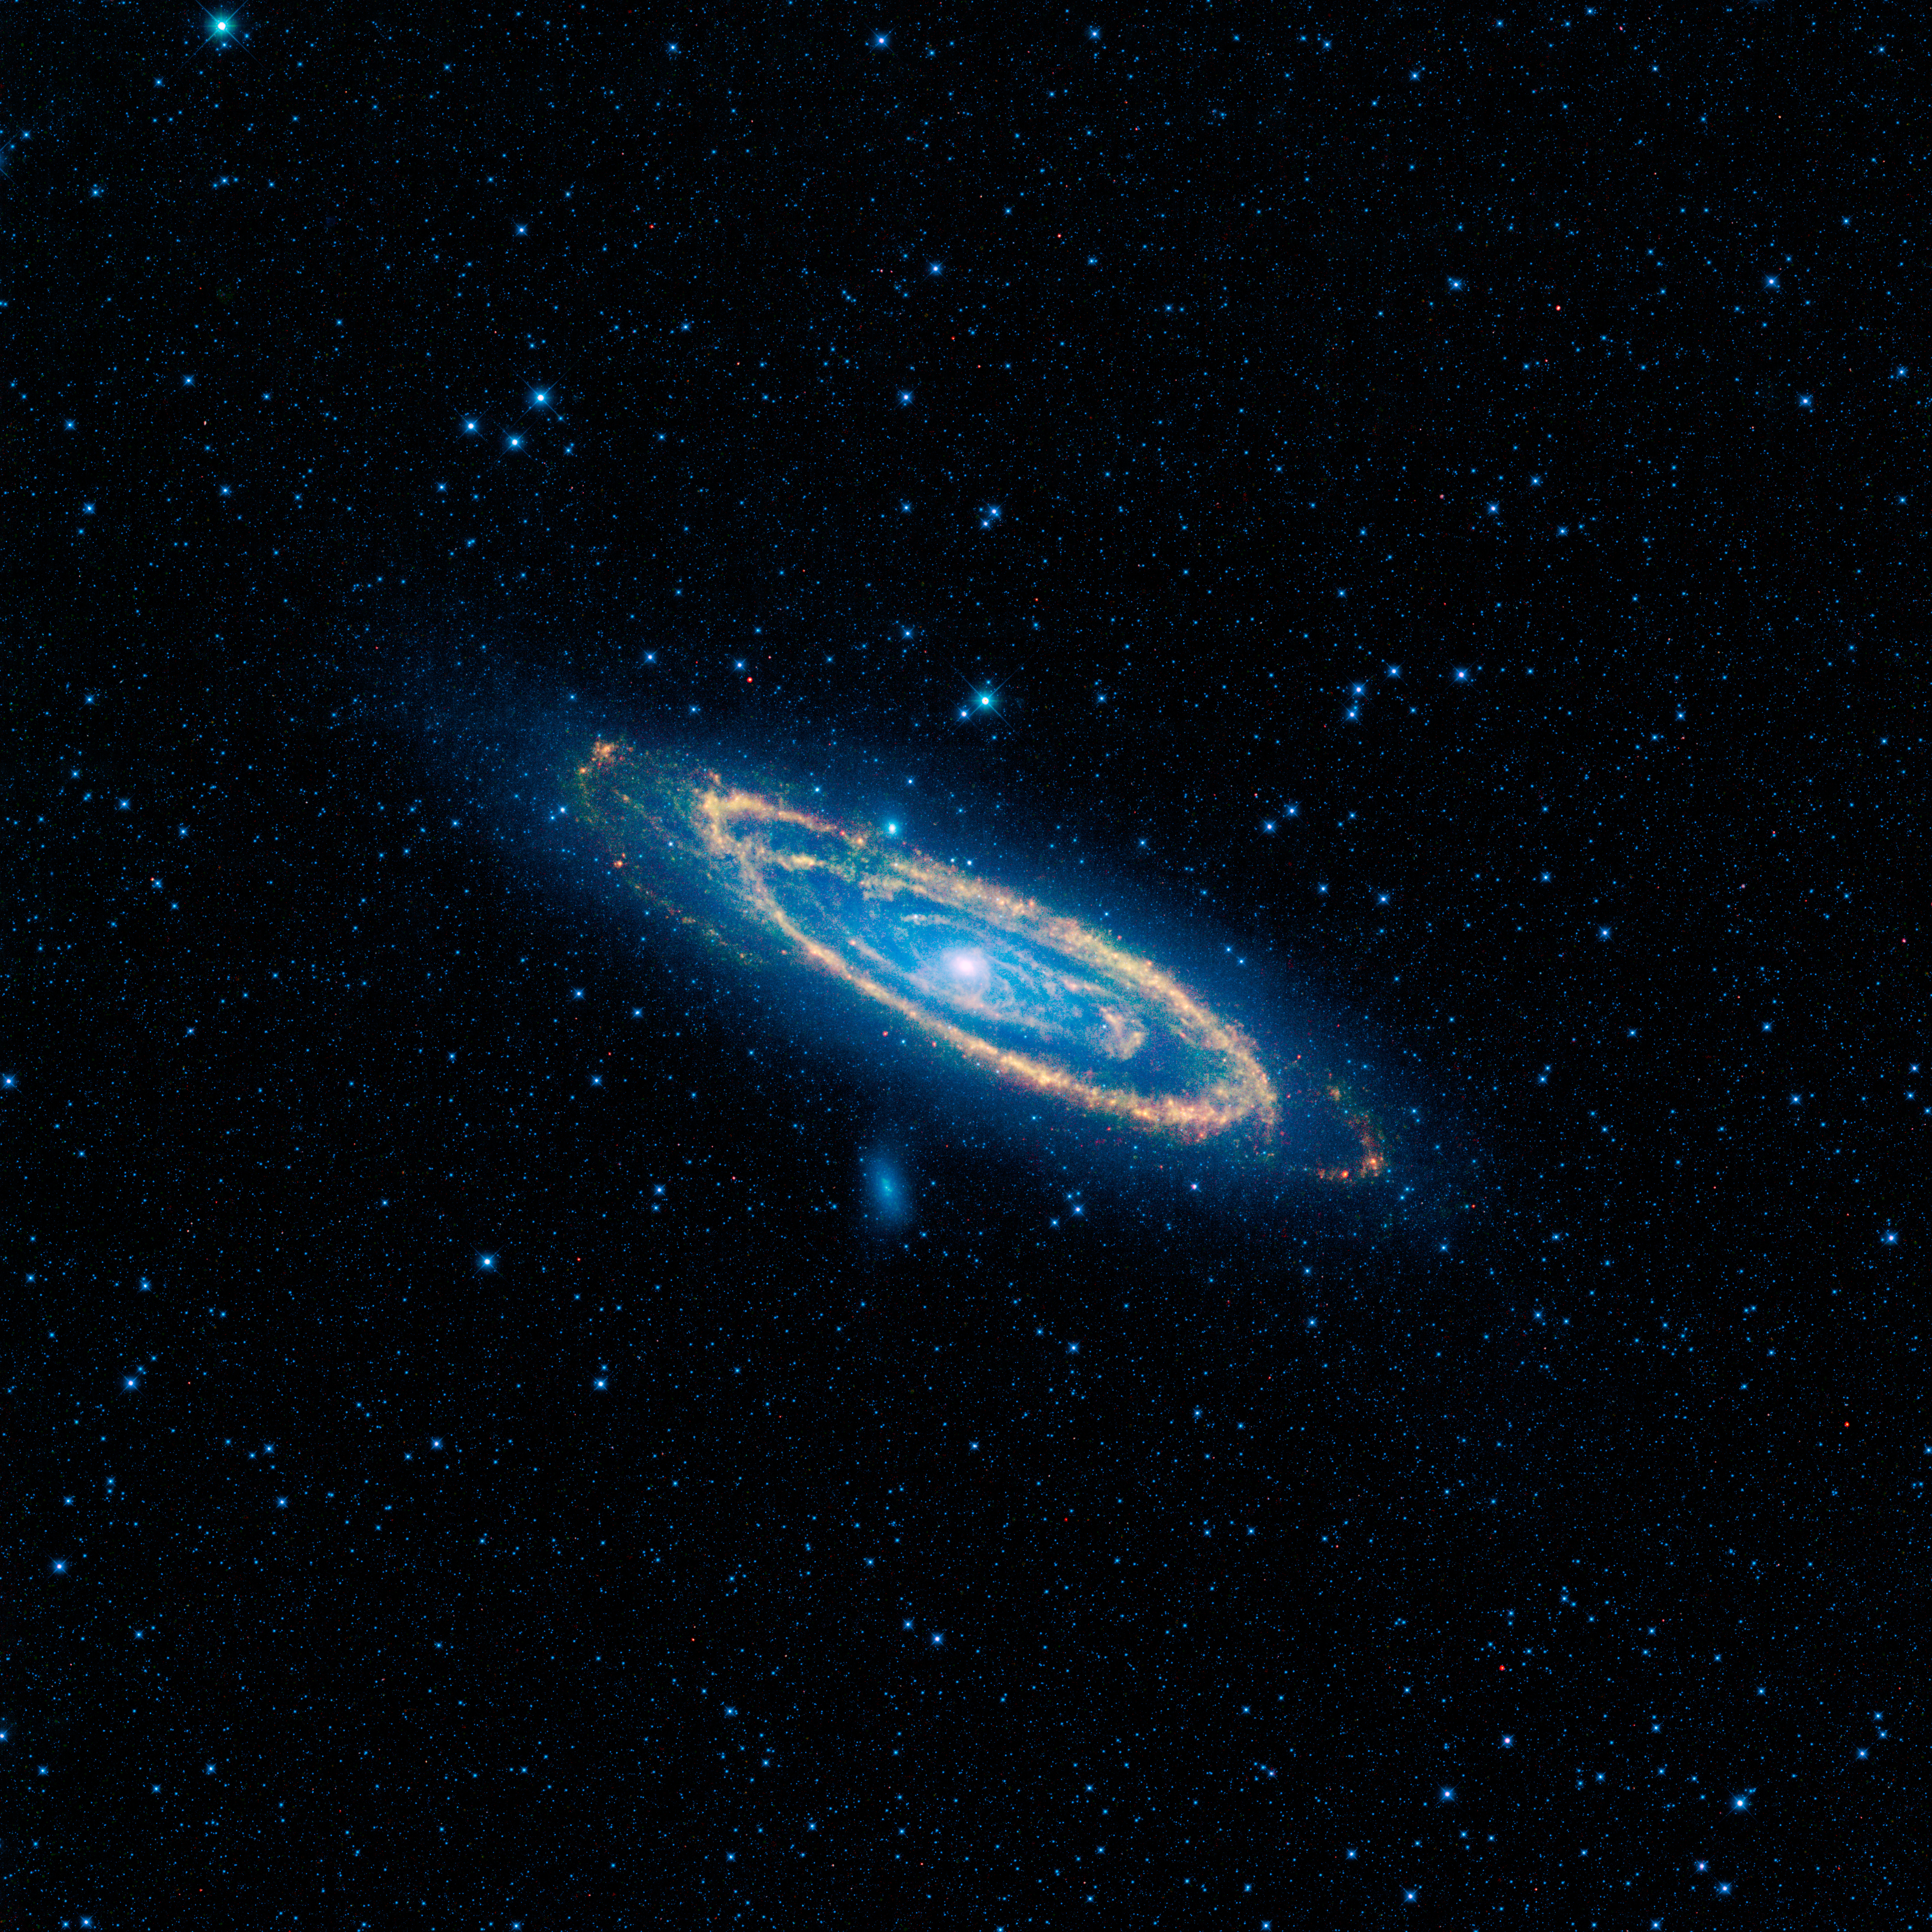 M31 is a spiral galaxy seen in this image against a black sky speckled with blue points of light. It appears like a flying disk toy seen tilted up and to the left, with a bright orange circle of light and tendrils of orange and pale blue light swirling in toward a central bright, white spot.